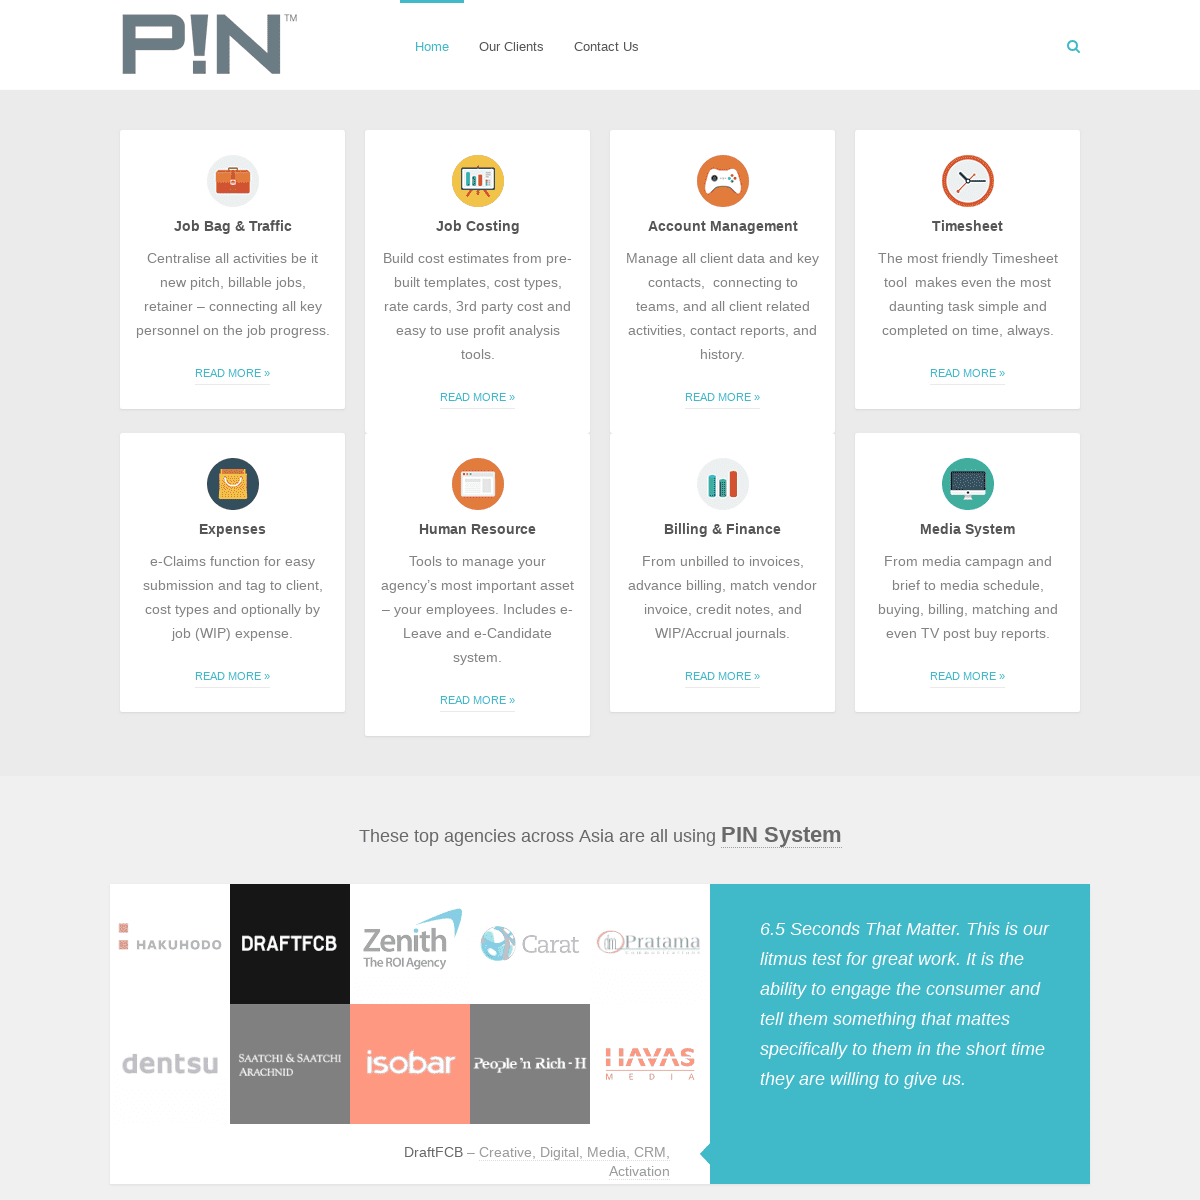 PIN System | Empowering advertising and media agencies